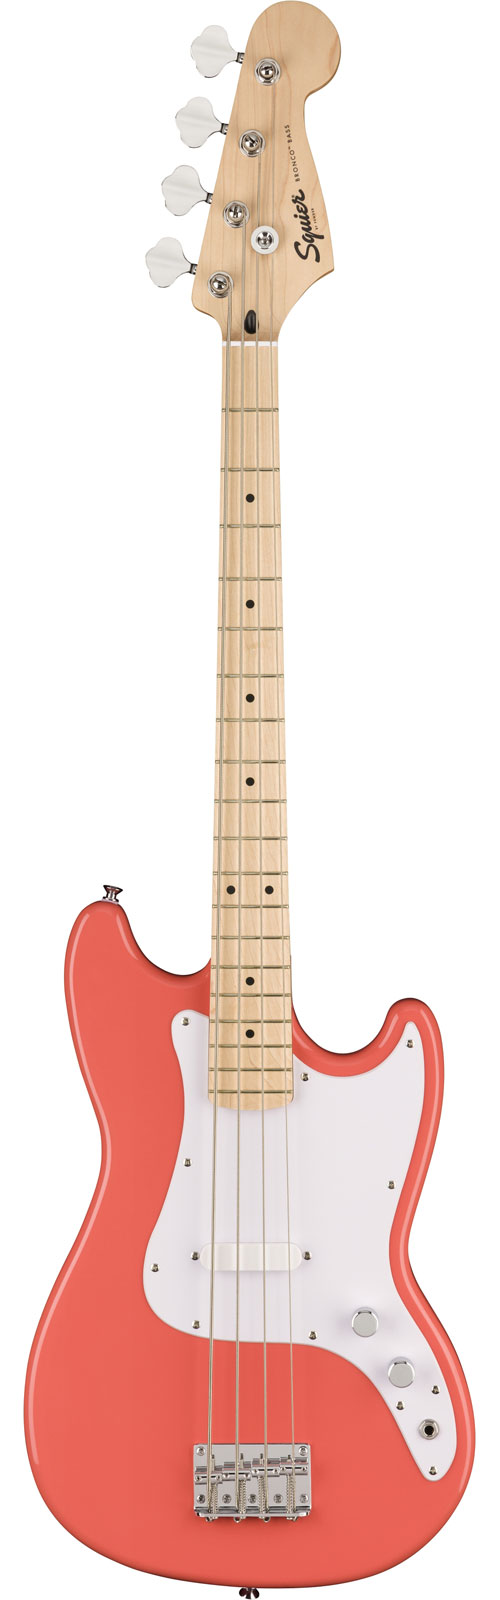 SQUIER BRONCO BASS SONIC MN TAHITIAN CORAL